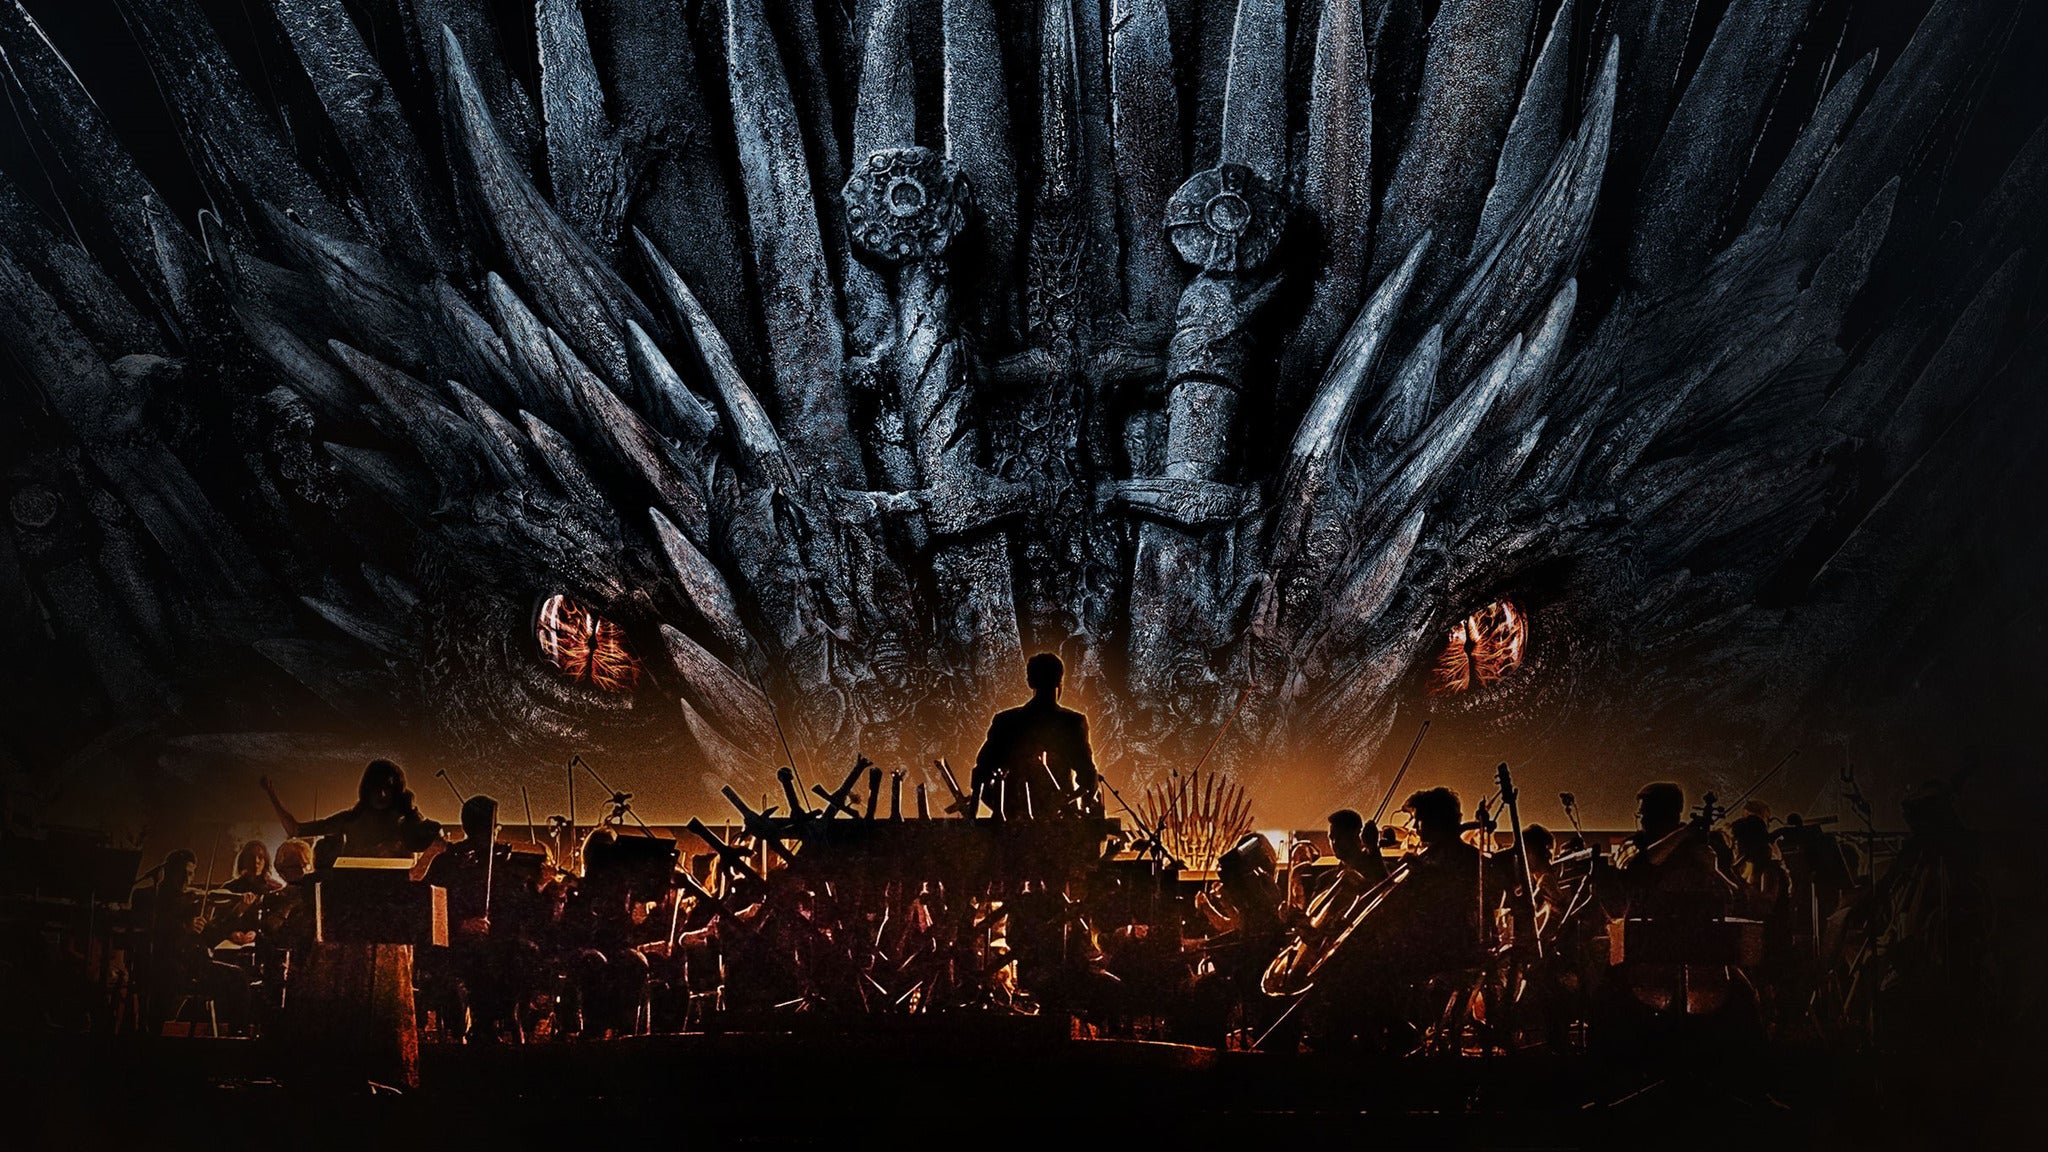 Game Of Thrones Live Concert Experience - Music By Ramin Djawadi in Alpharetta promo photo for Official Platinum presale offer code